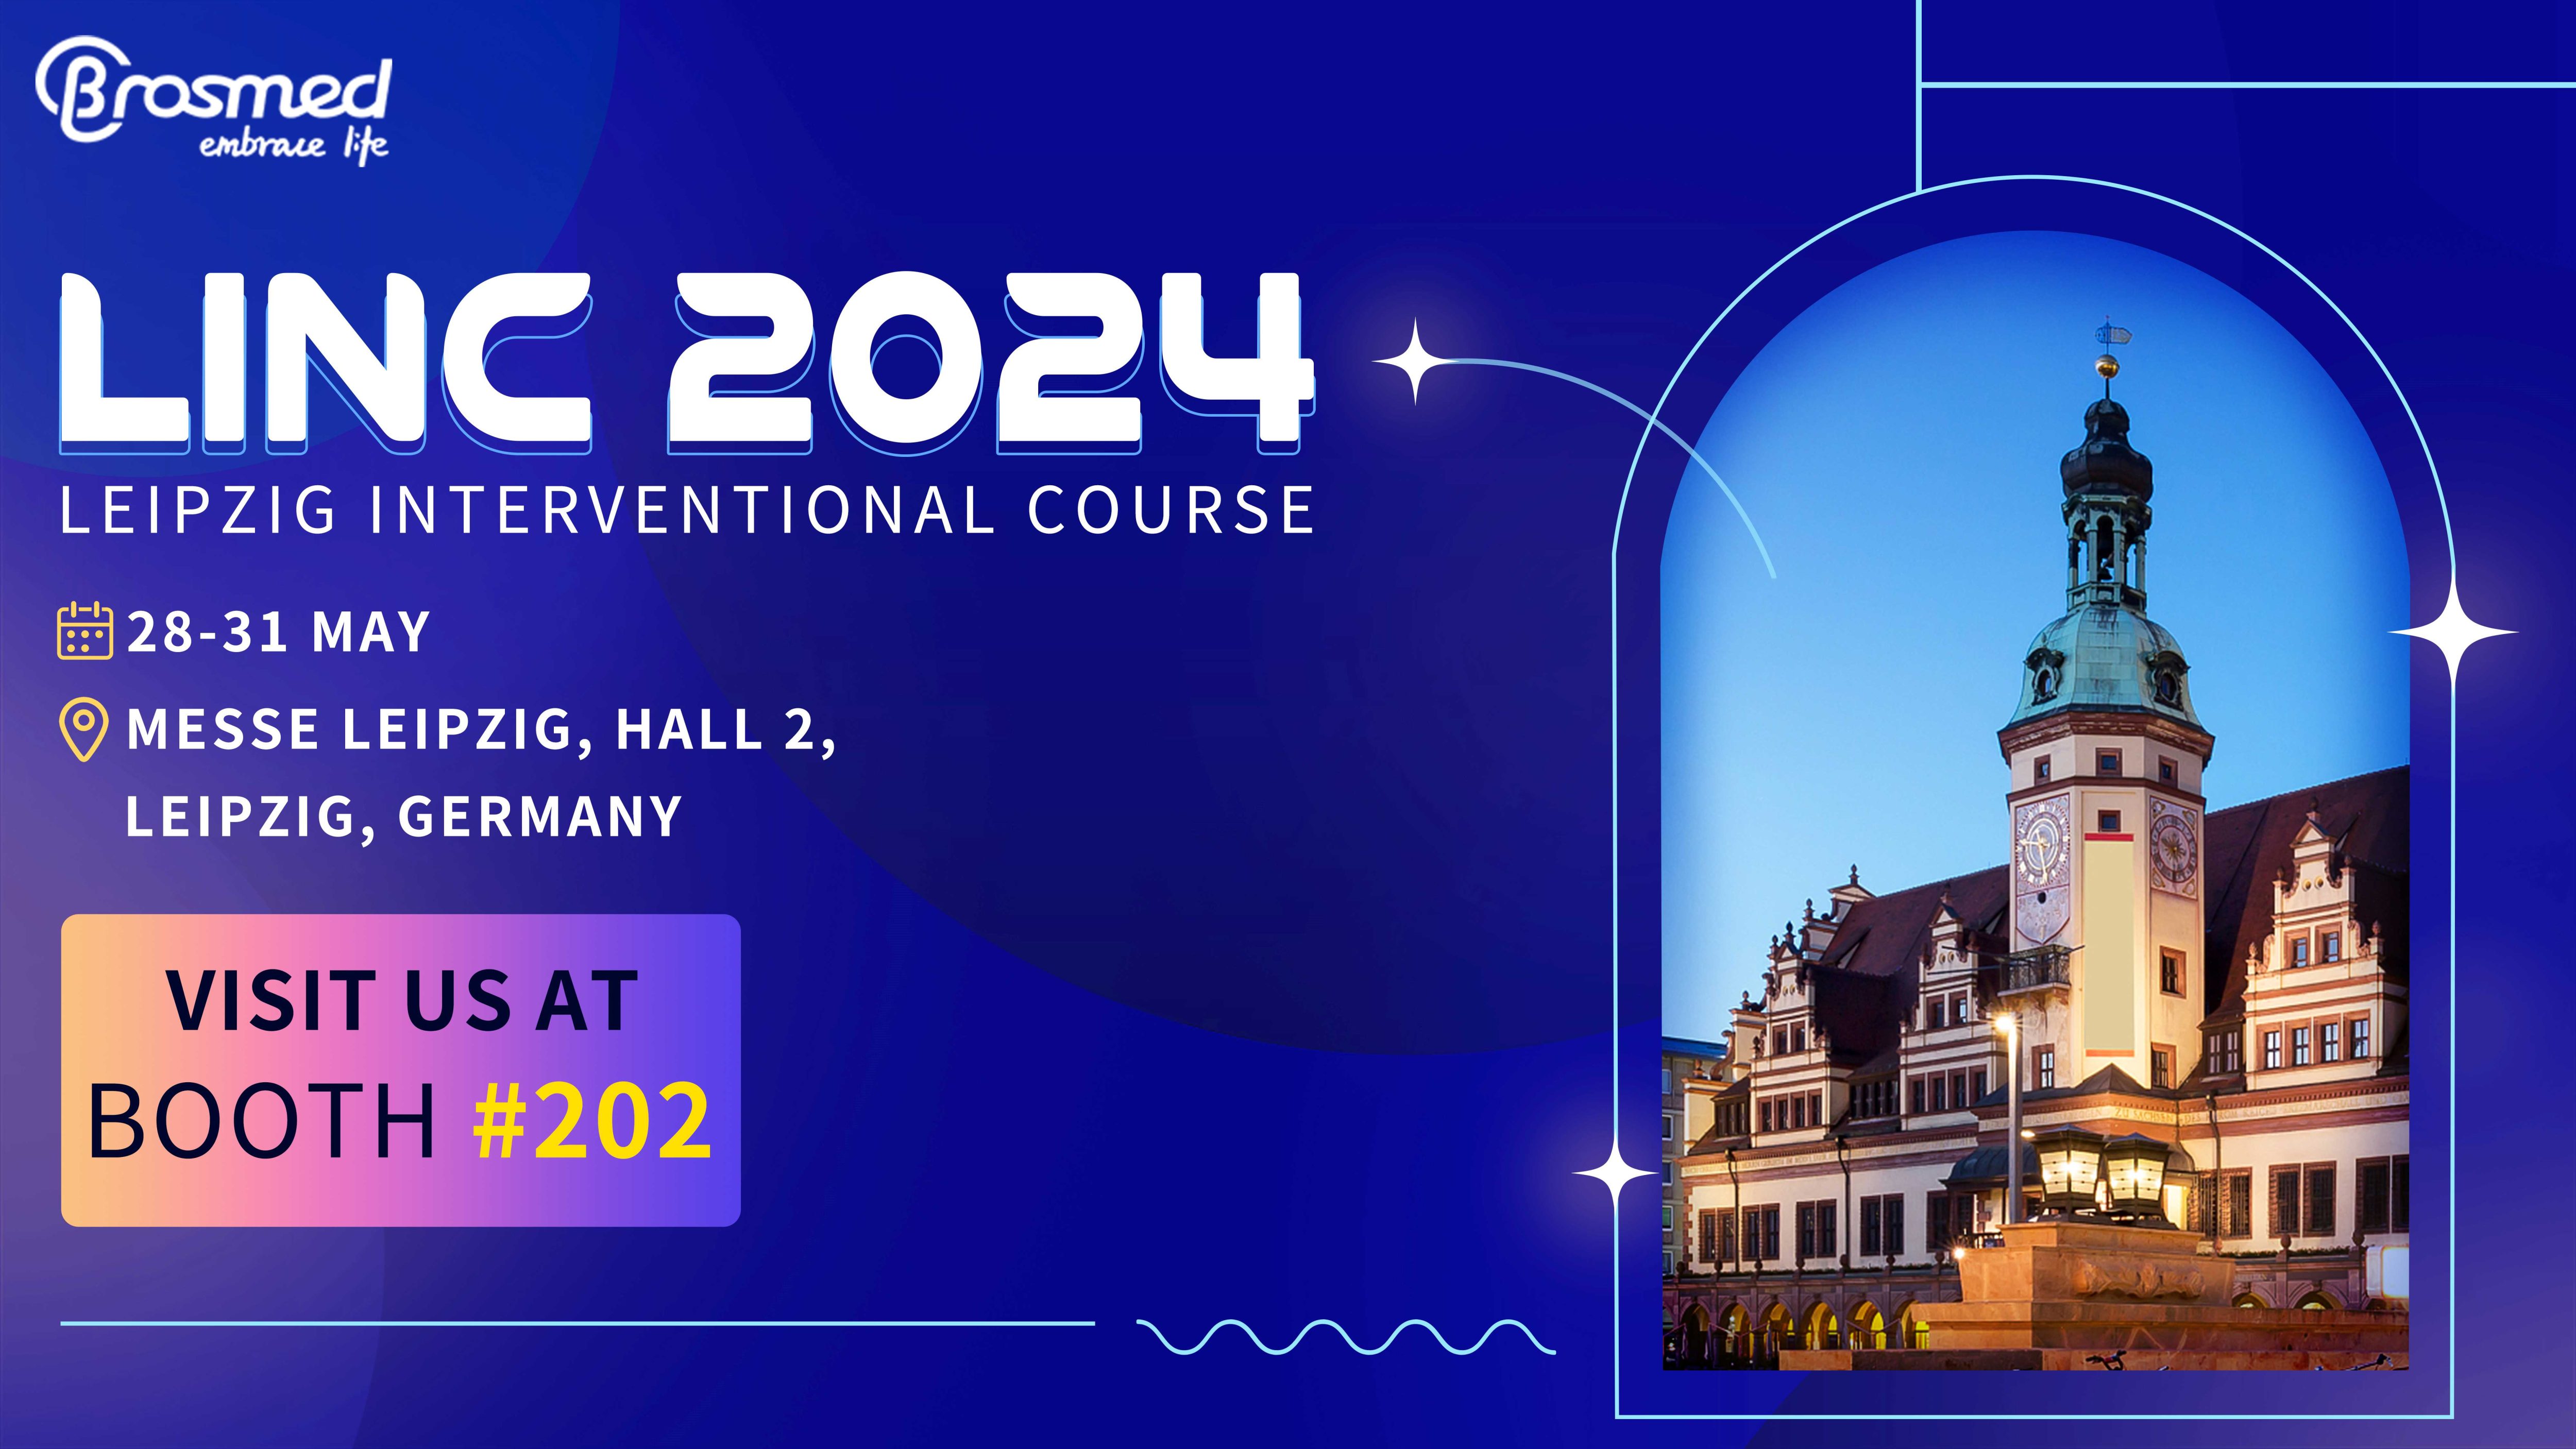 Meet BrosMed at Leipzig Interventional Course (LINC 2024)